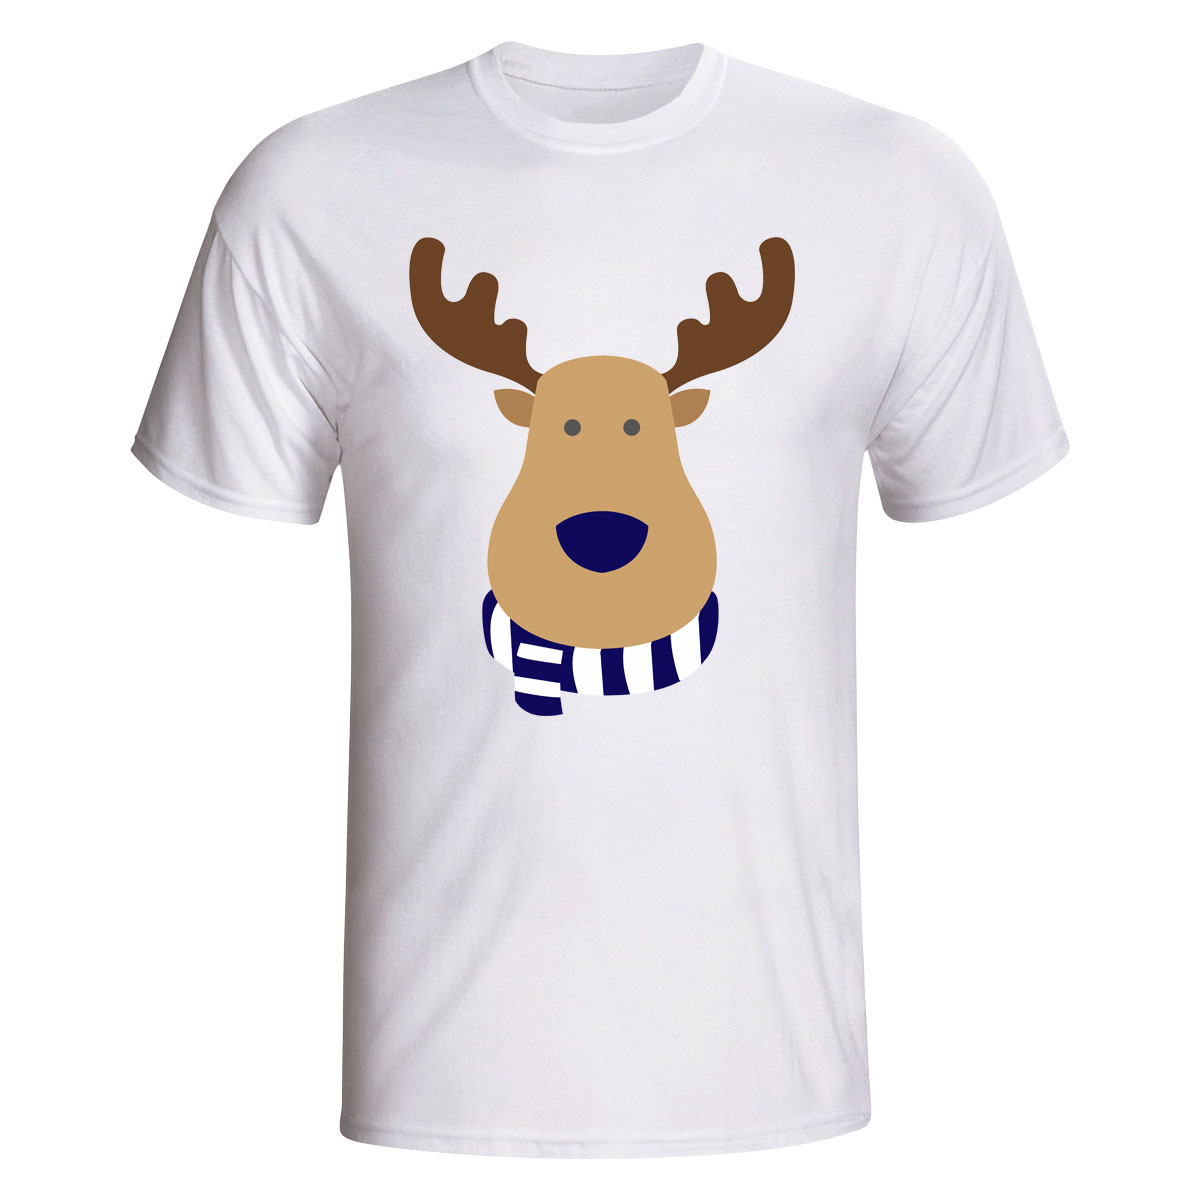 La Galaxy Rudolph Supporters T-shirt (white)